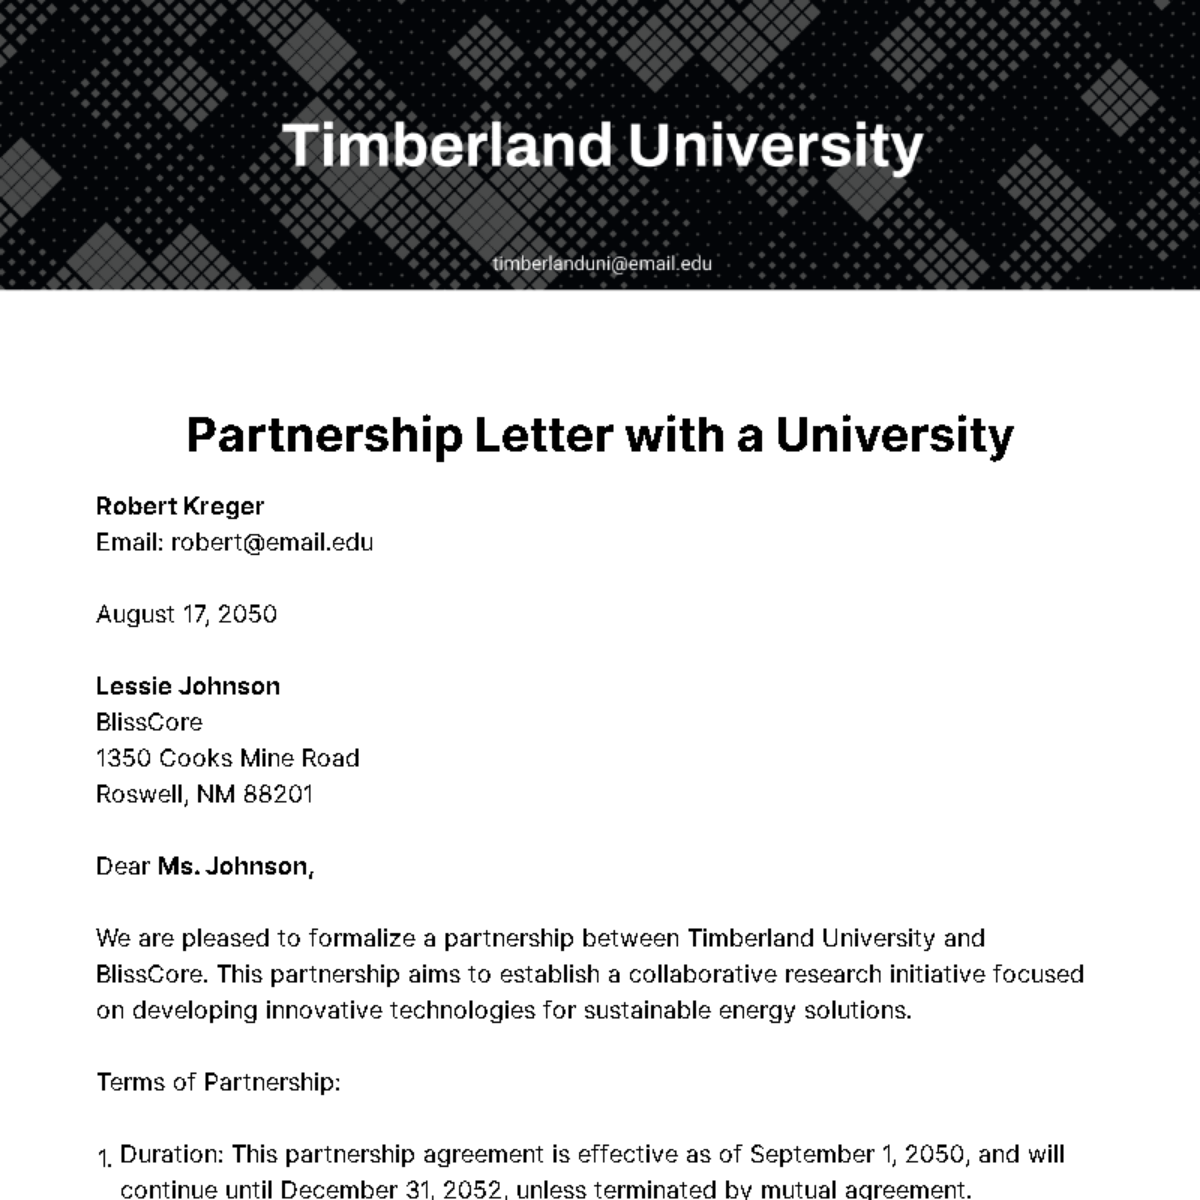 Free Partnership Letter with a University